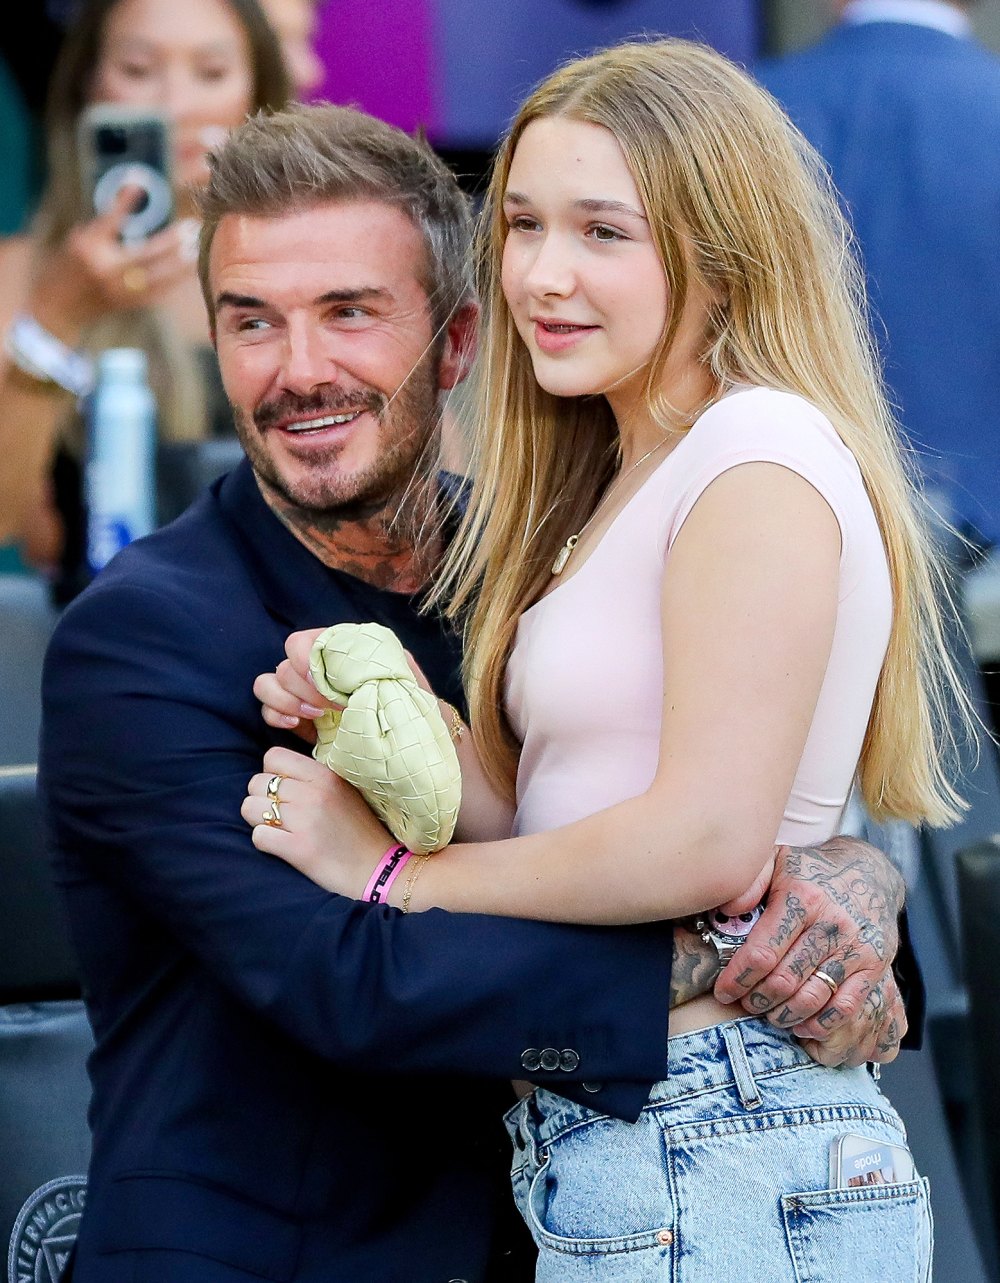 David Beckham Was 'Worried' About How His Daughter Harper Would React to 'Beckham' Documentary